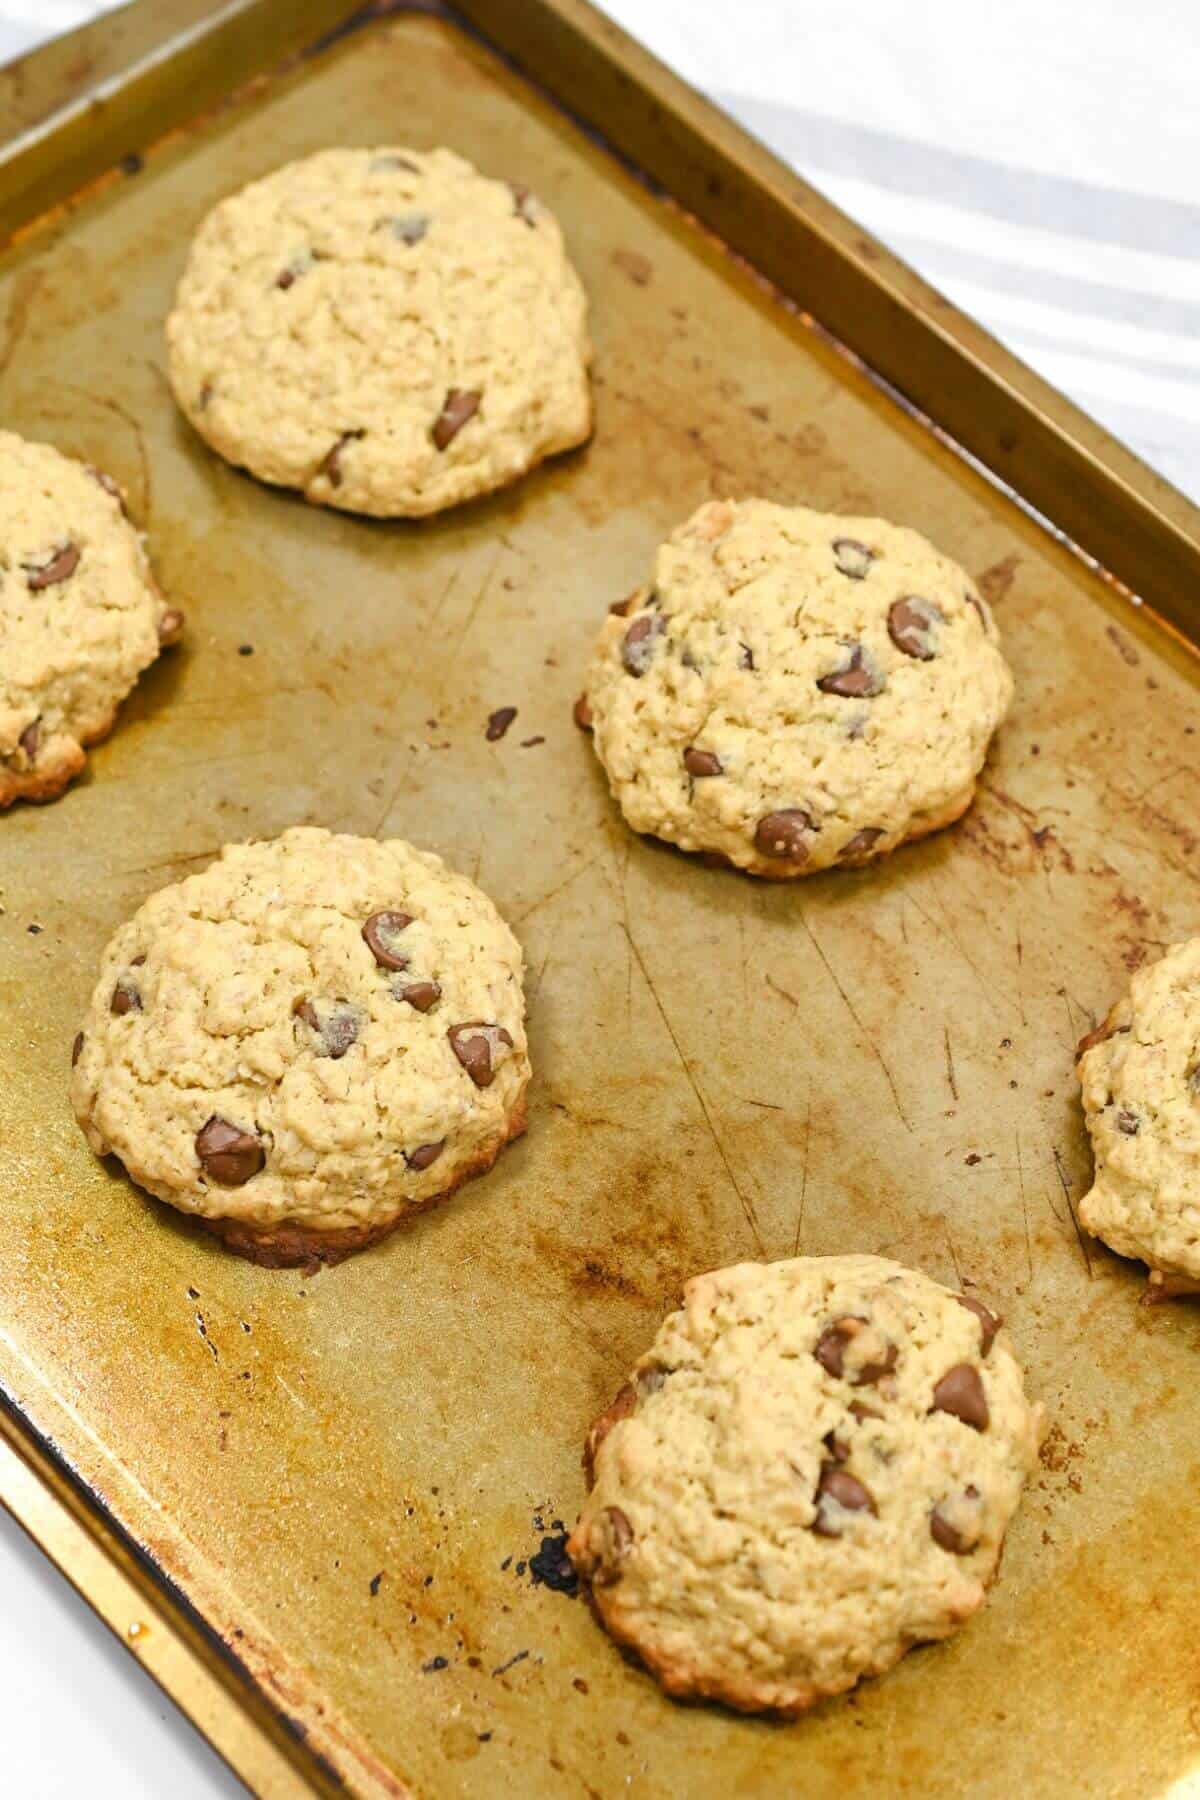 Oatmeal chocolate chip cookies on a baking sheet.